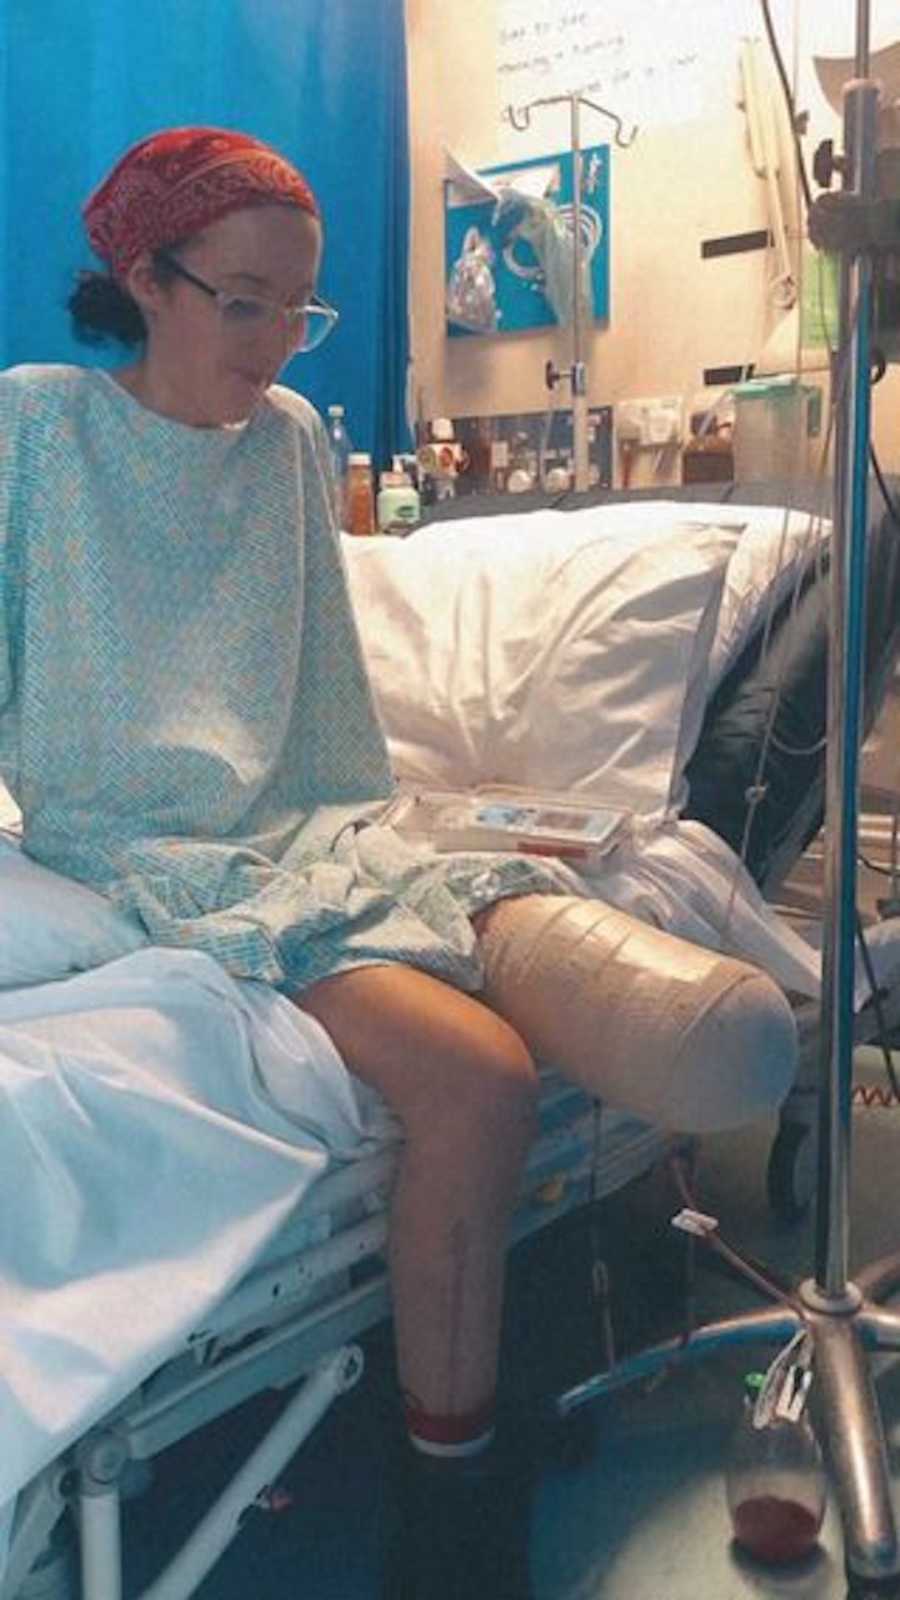 woman with lower part of left leg amputated in hospital bed